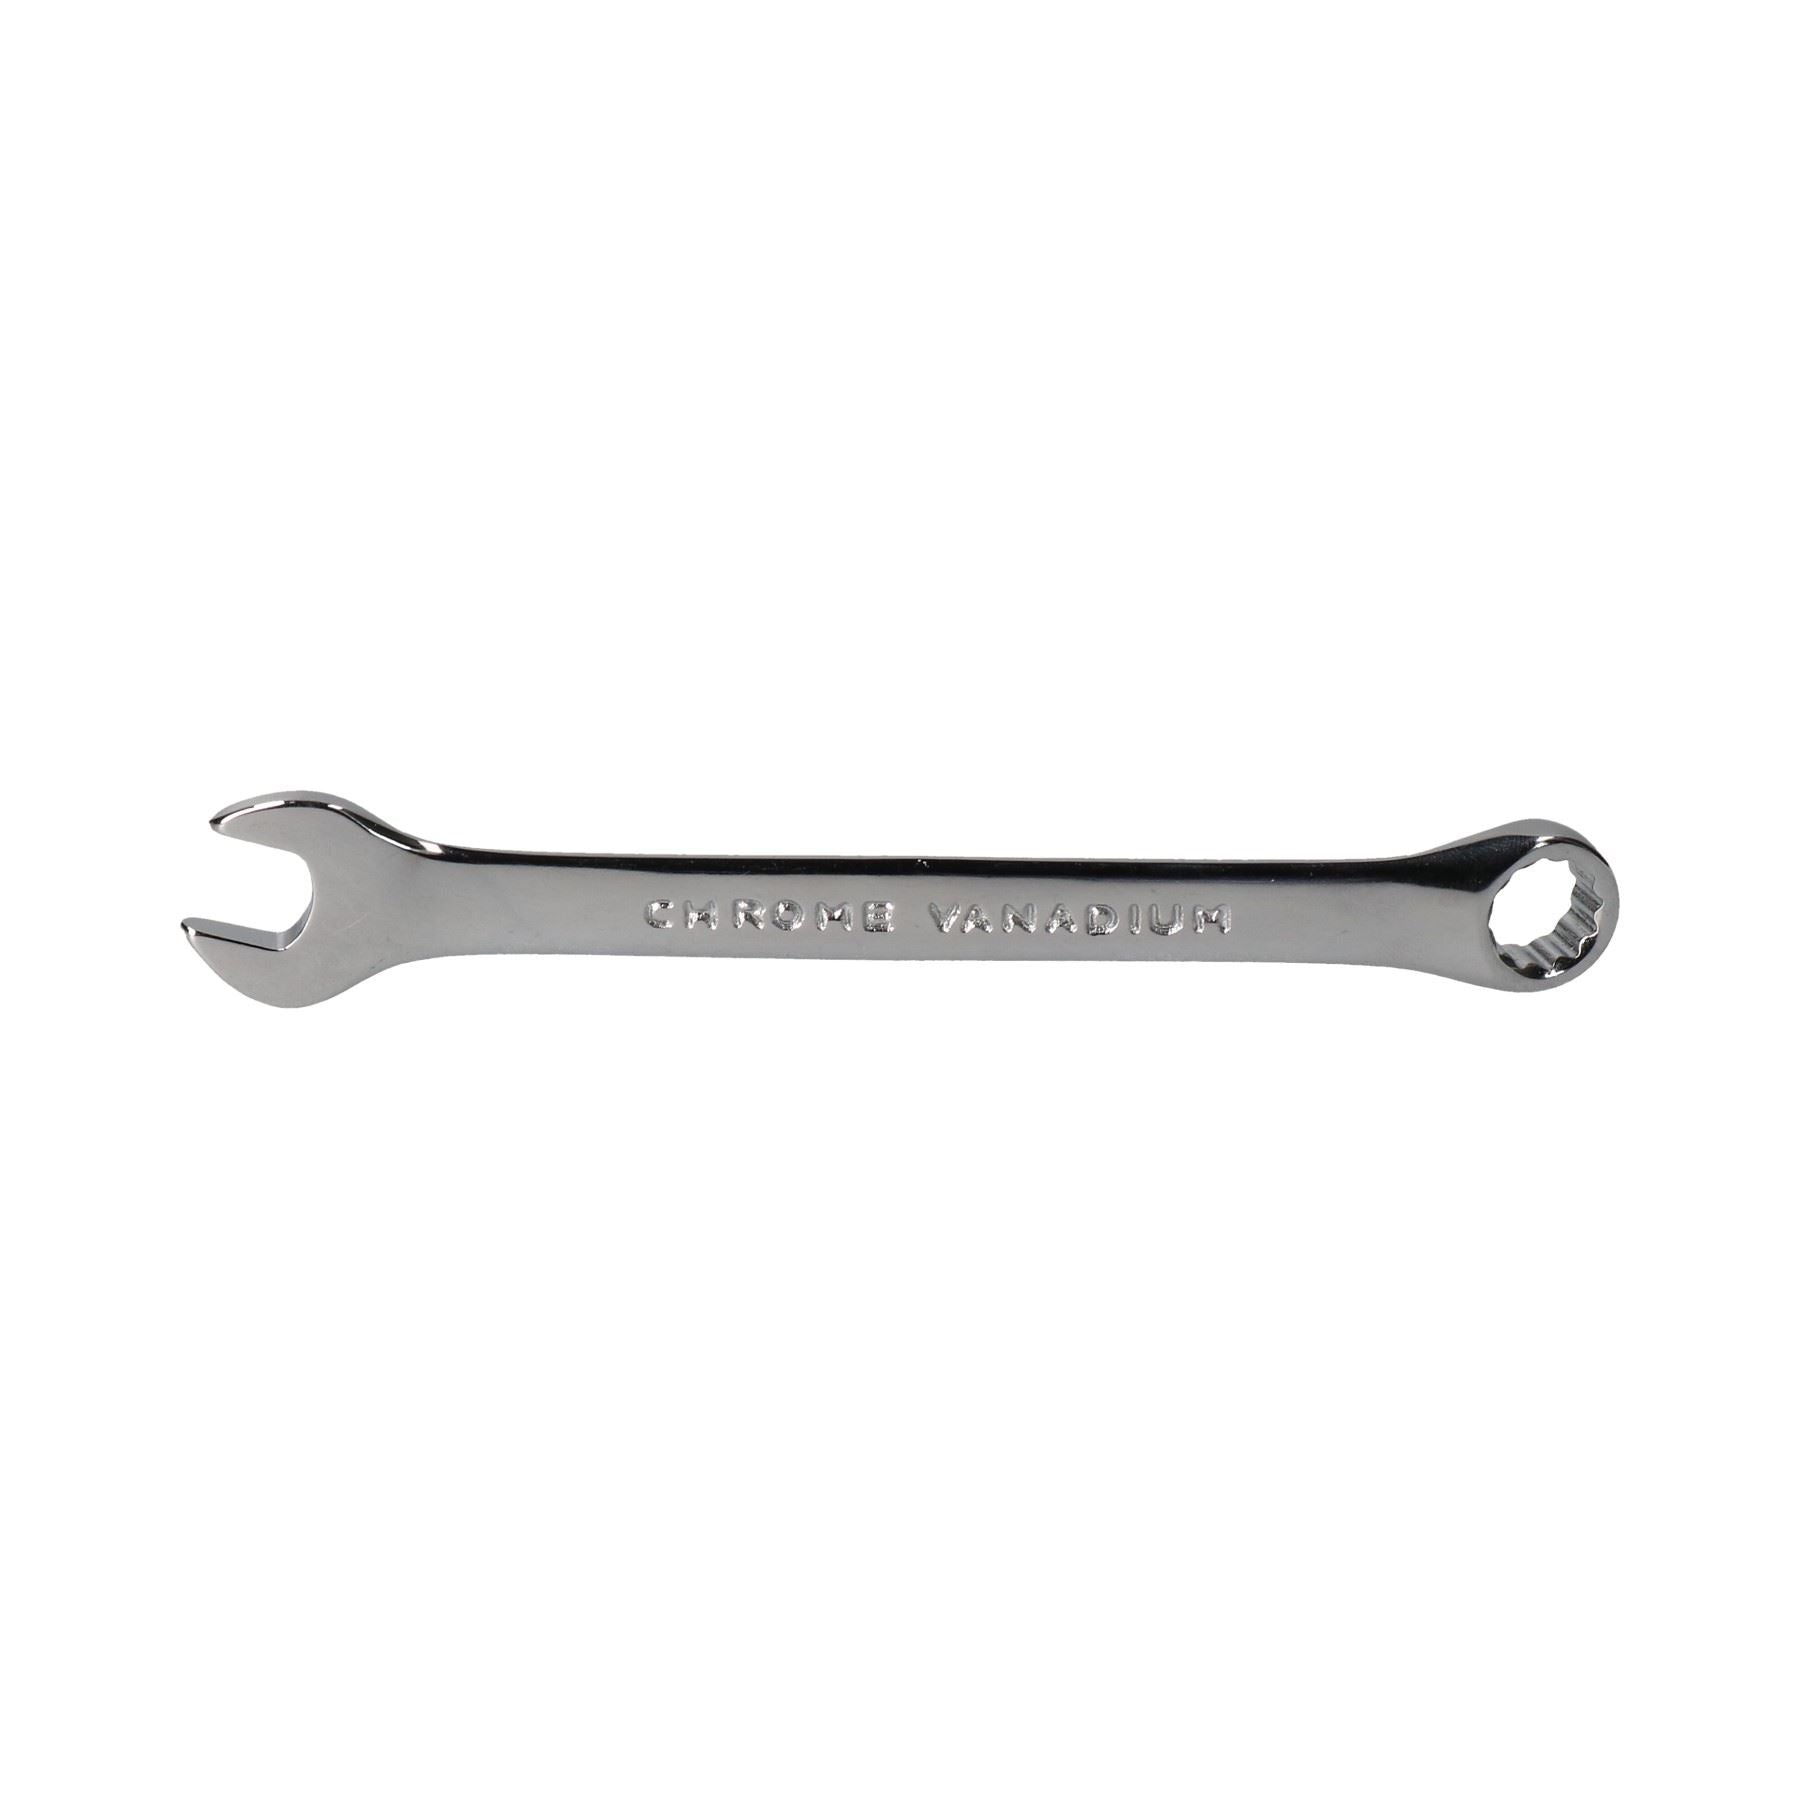 10mm Metric Combination Combo Spanner Wrench Ring Open Ended Bi-Hex Ring